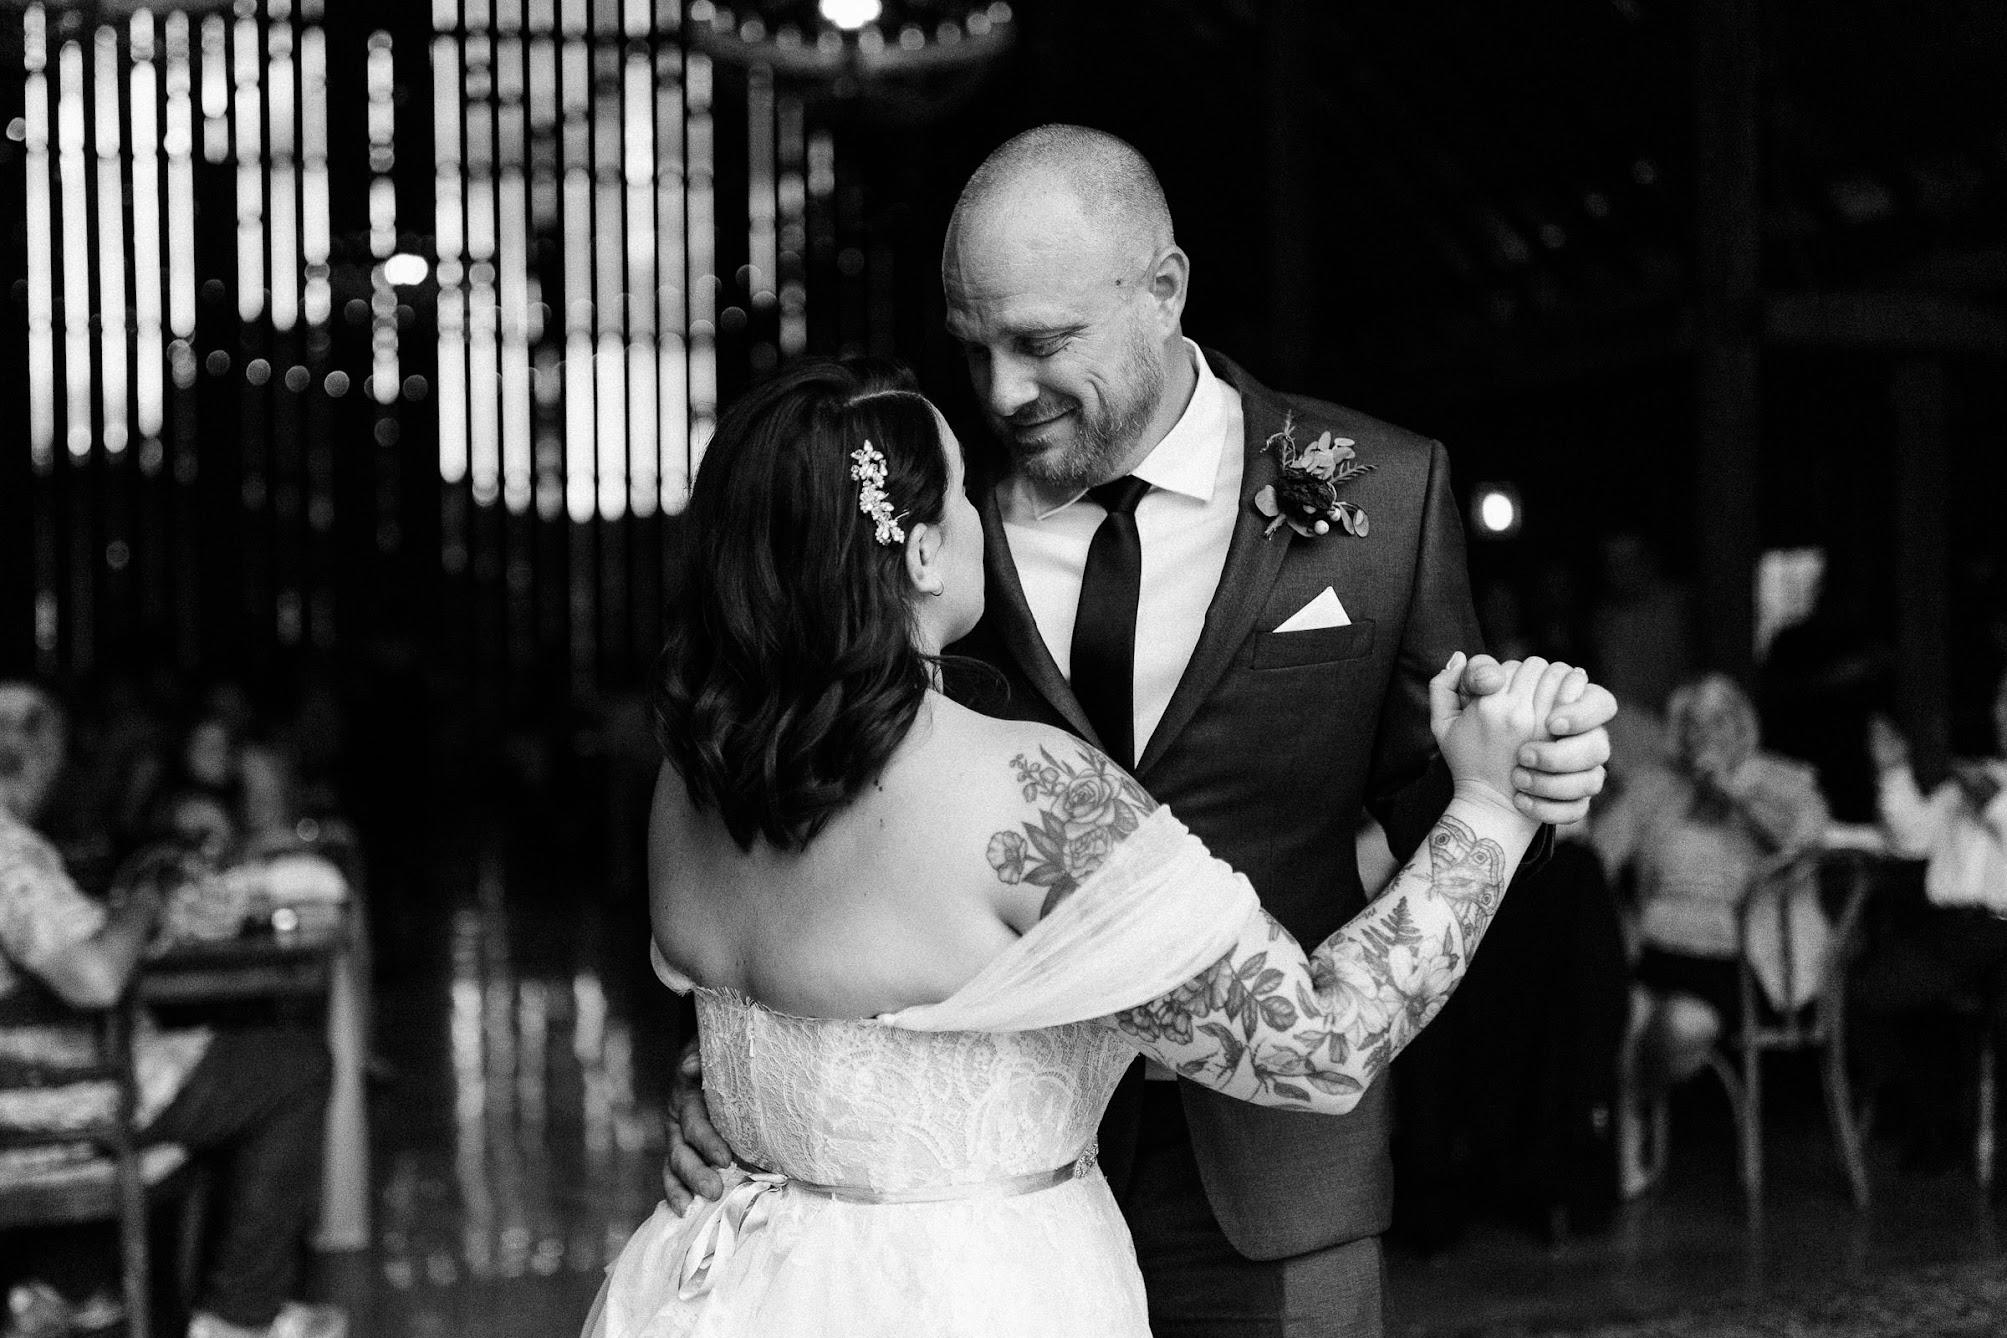 A black and white photo of the bride and groom sharing a first dance together.